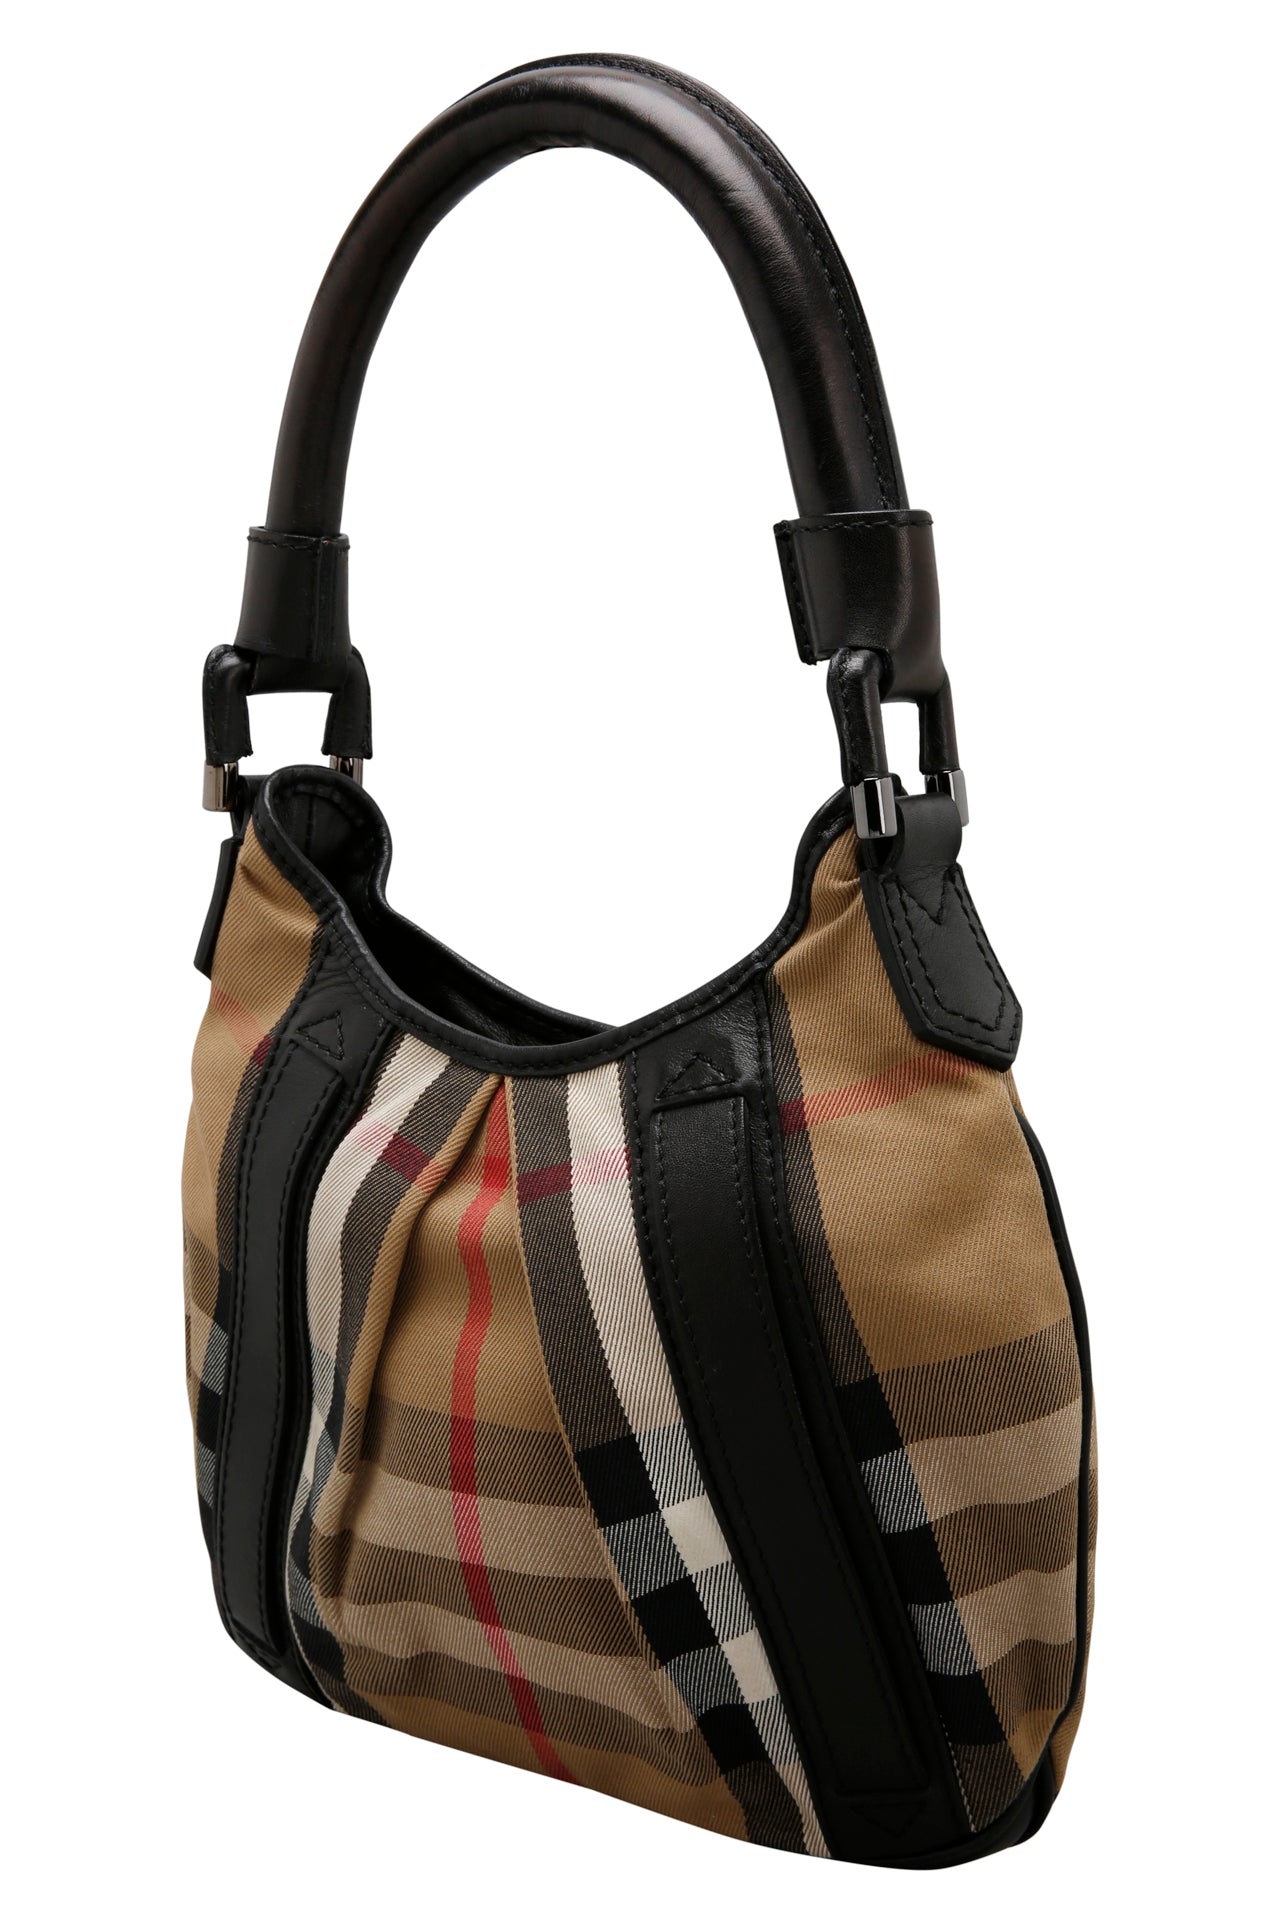 Burberry House Check Canvas and Black Leather Phoebe Hobo